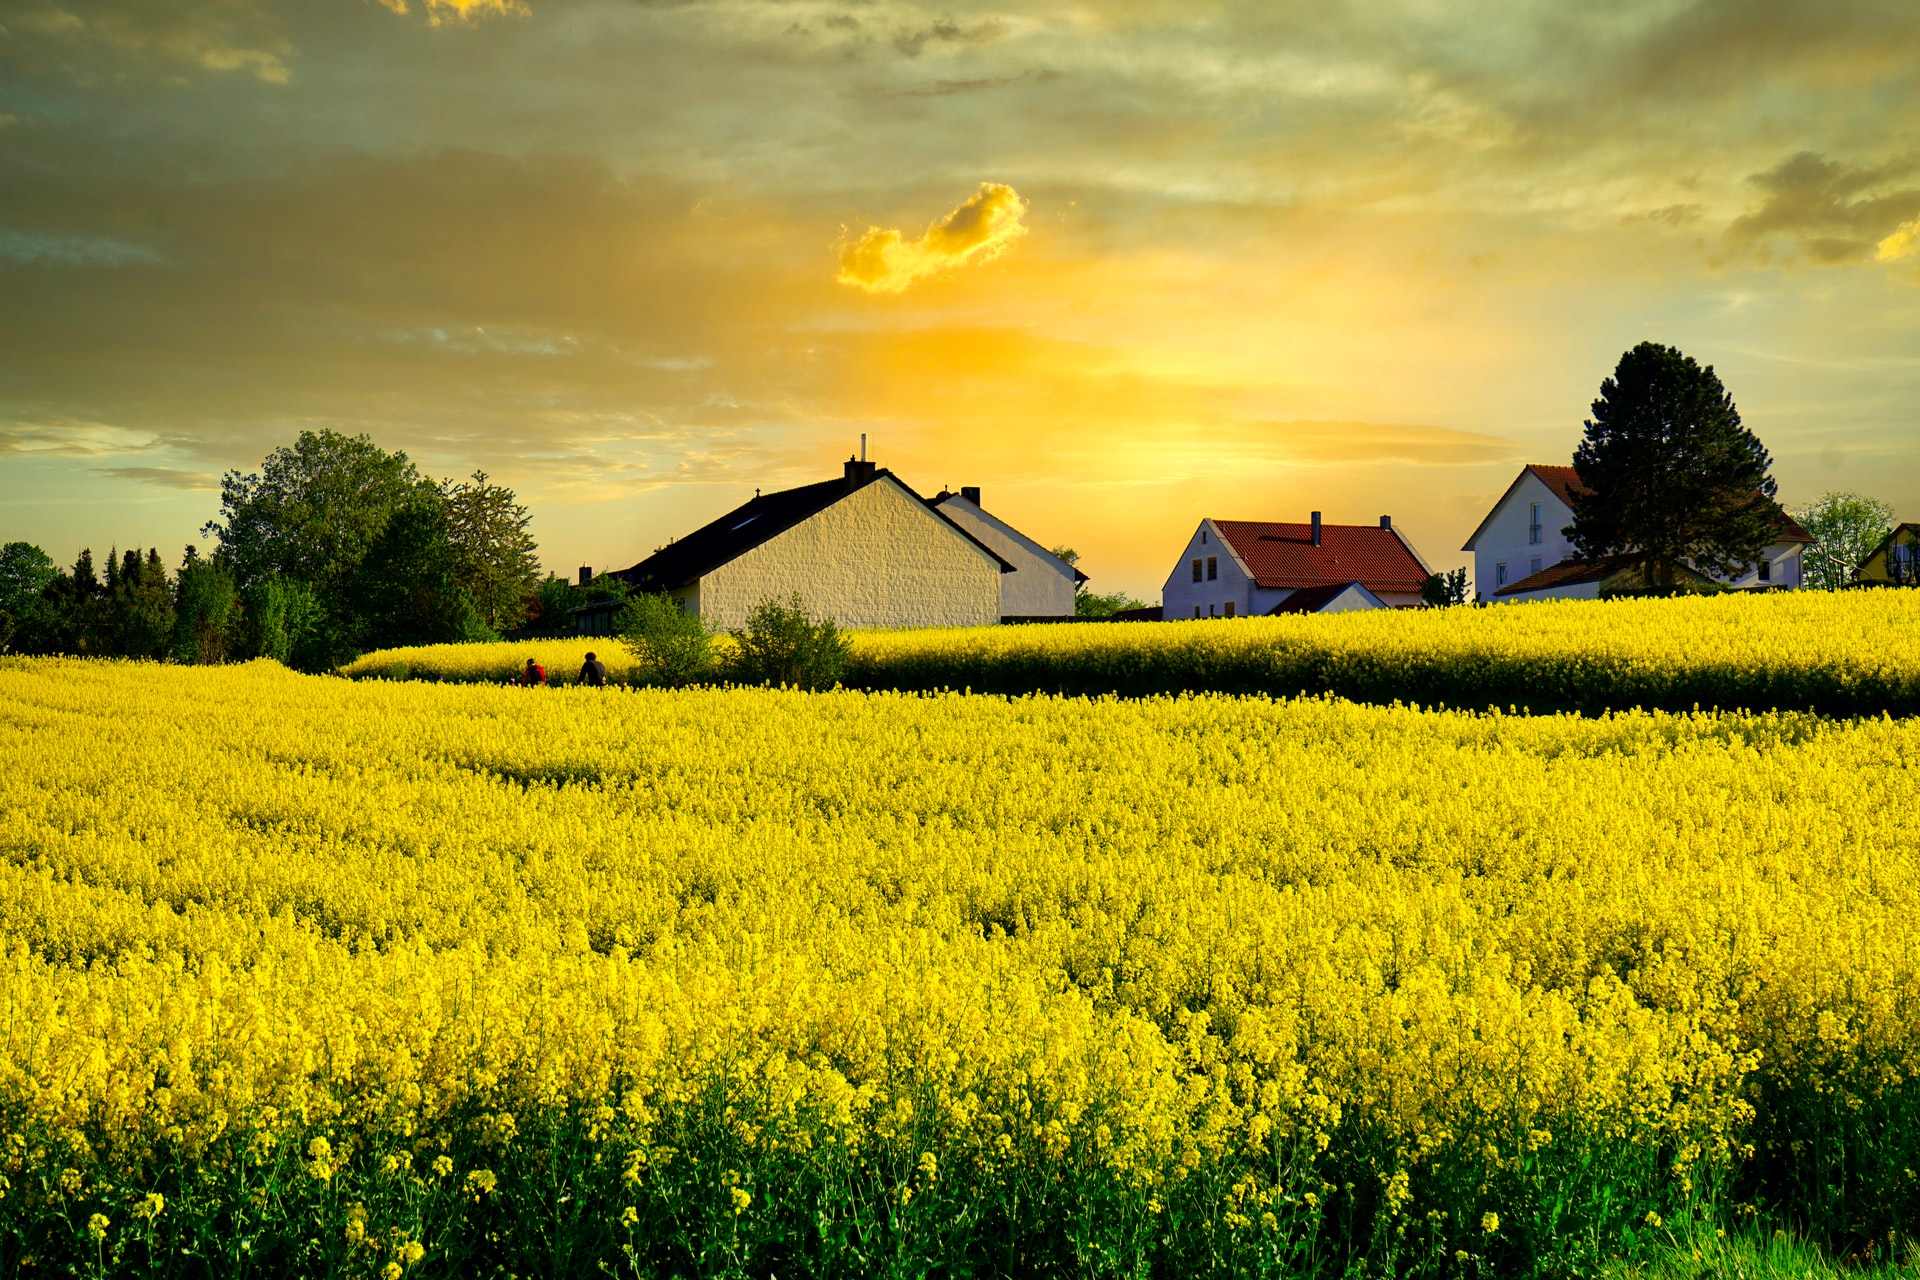 Rapeseed flower field with farm in the background.